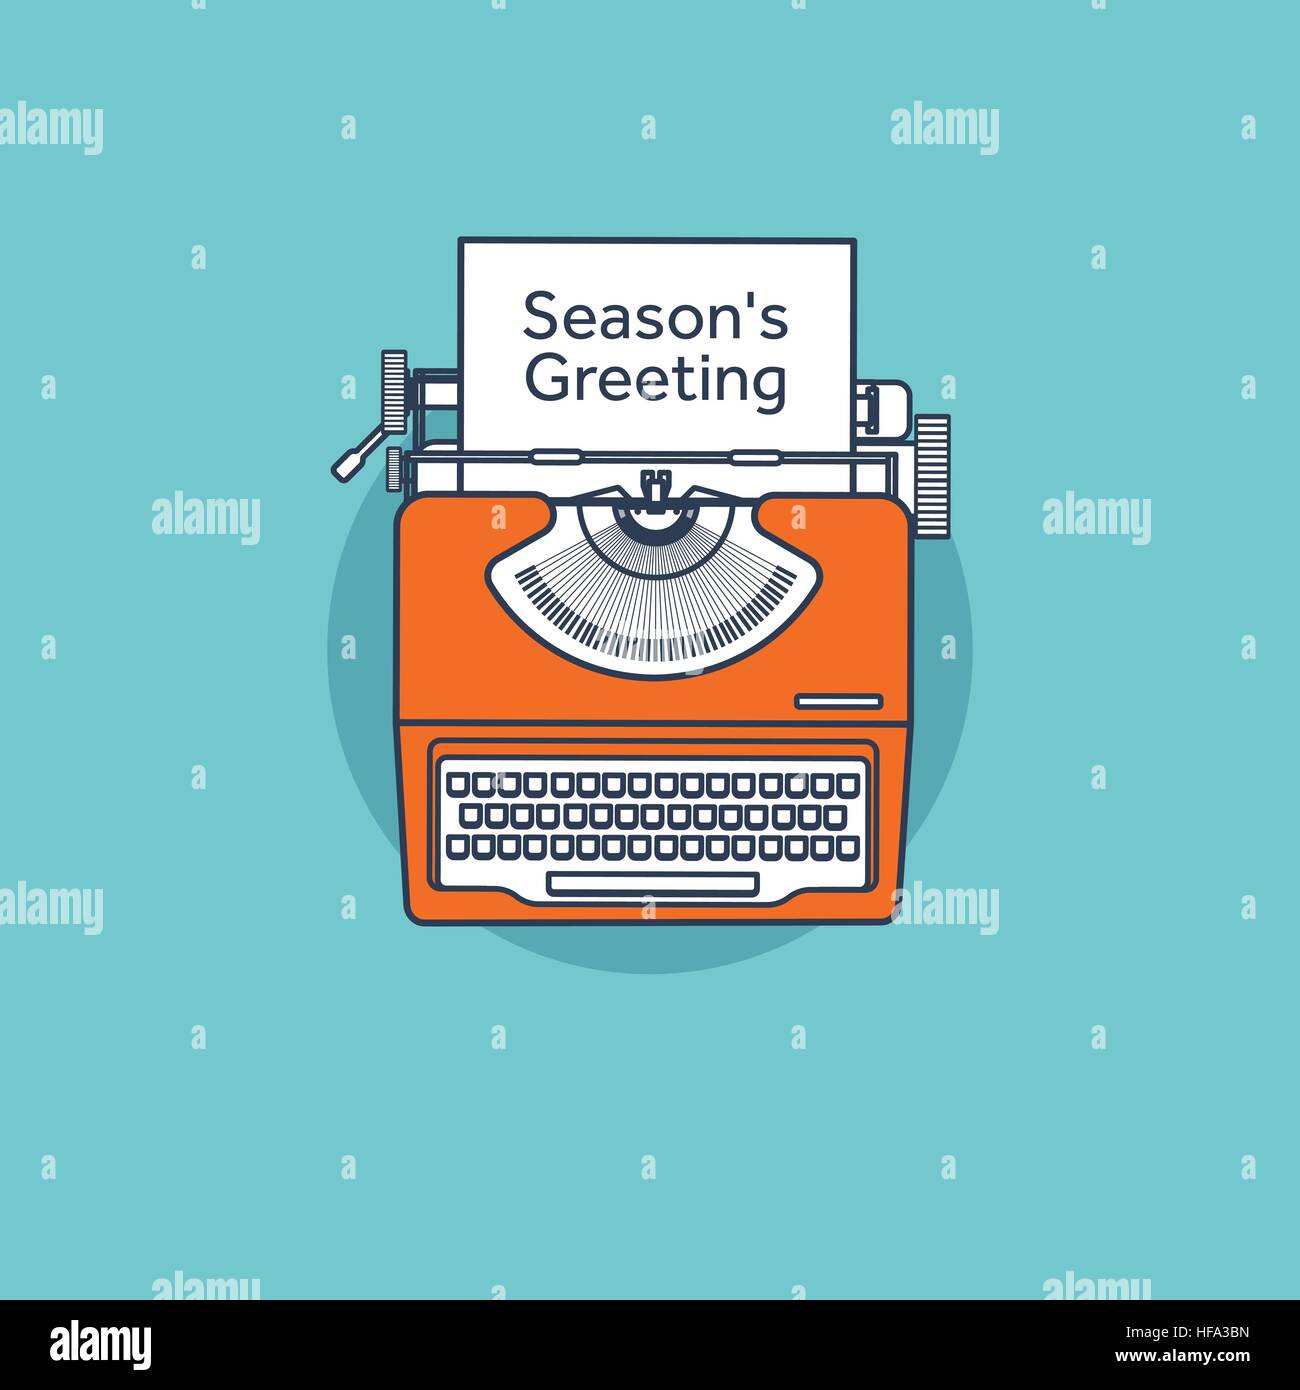 Typewriter in a flat style. Christmas wish list. Letter to Santa. New year. 2017. December holidays.Seasons greeting. Stock Vector